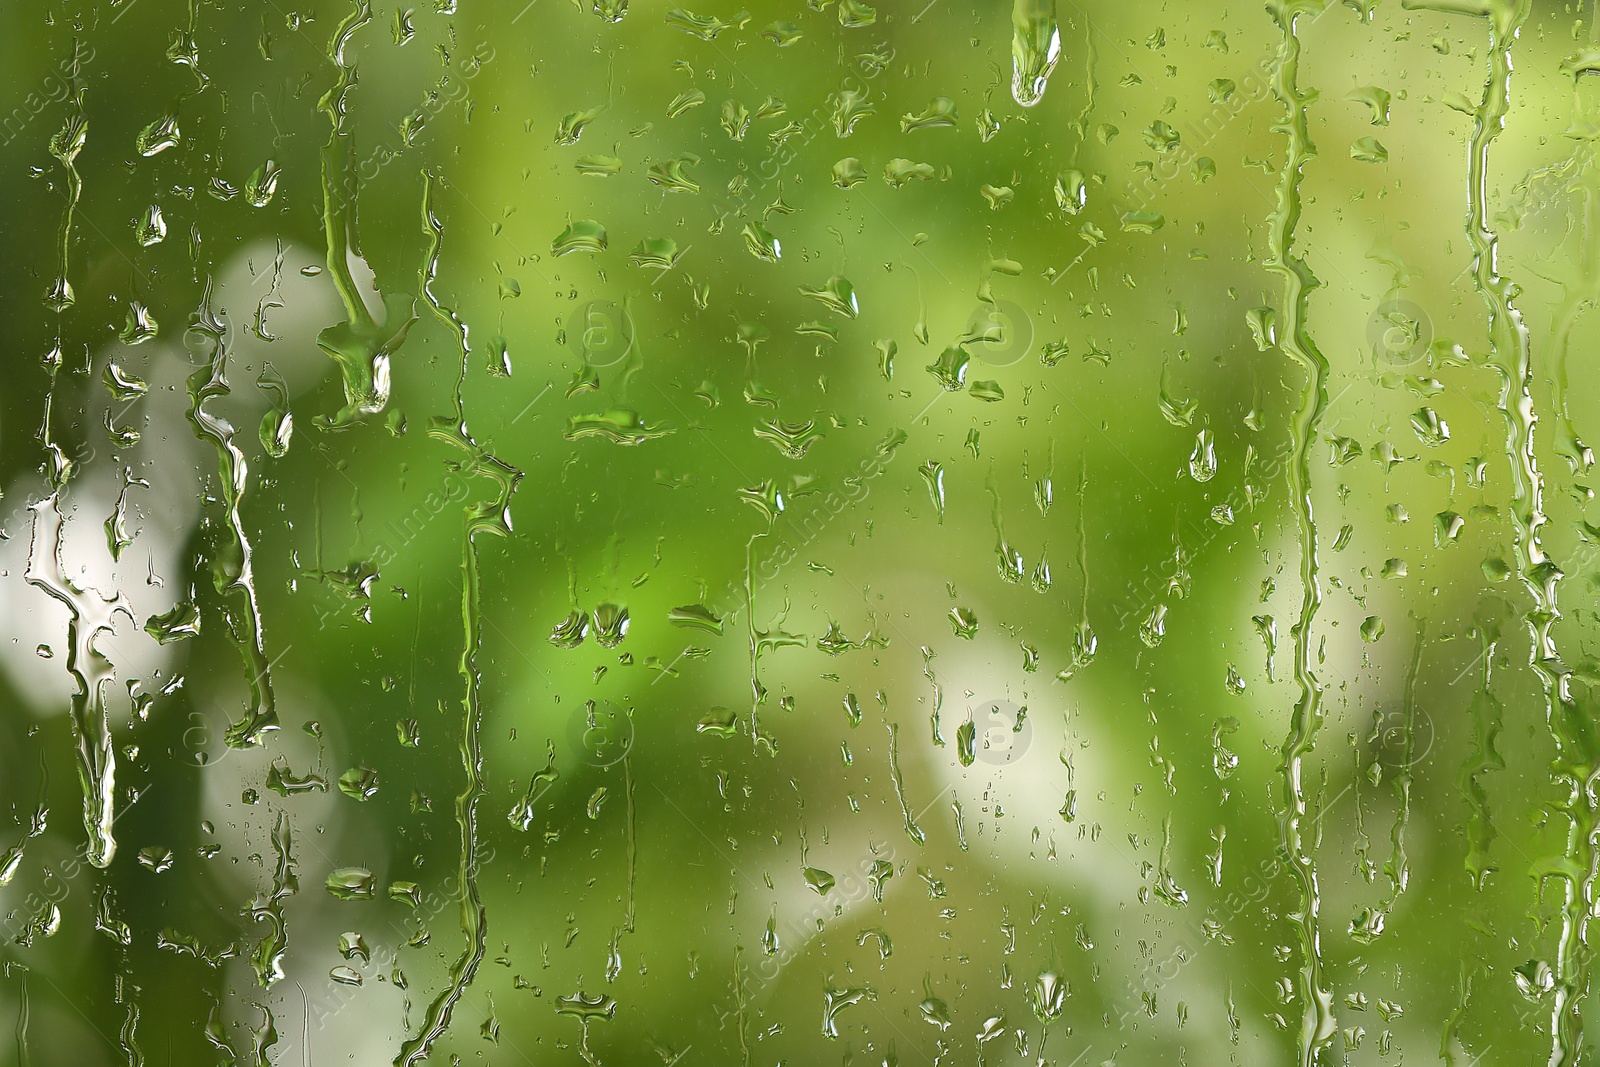 Photo of View of glass with water drops, closeup